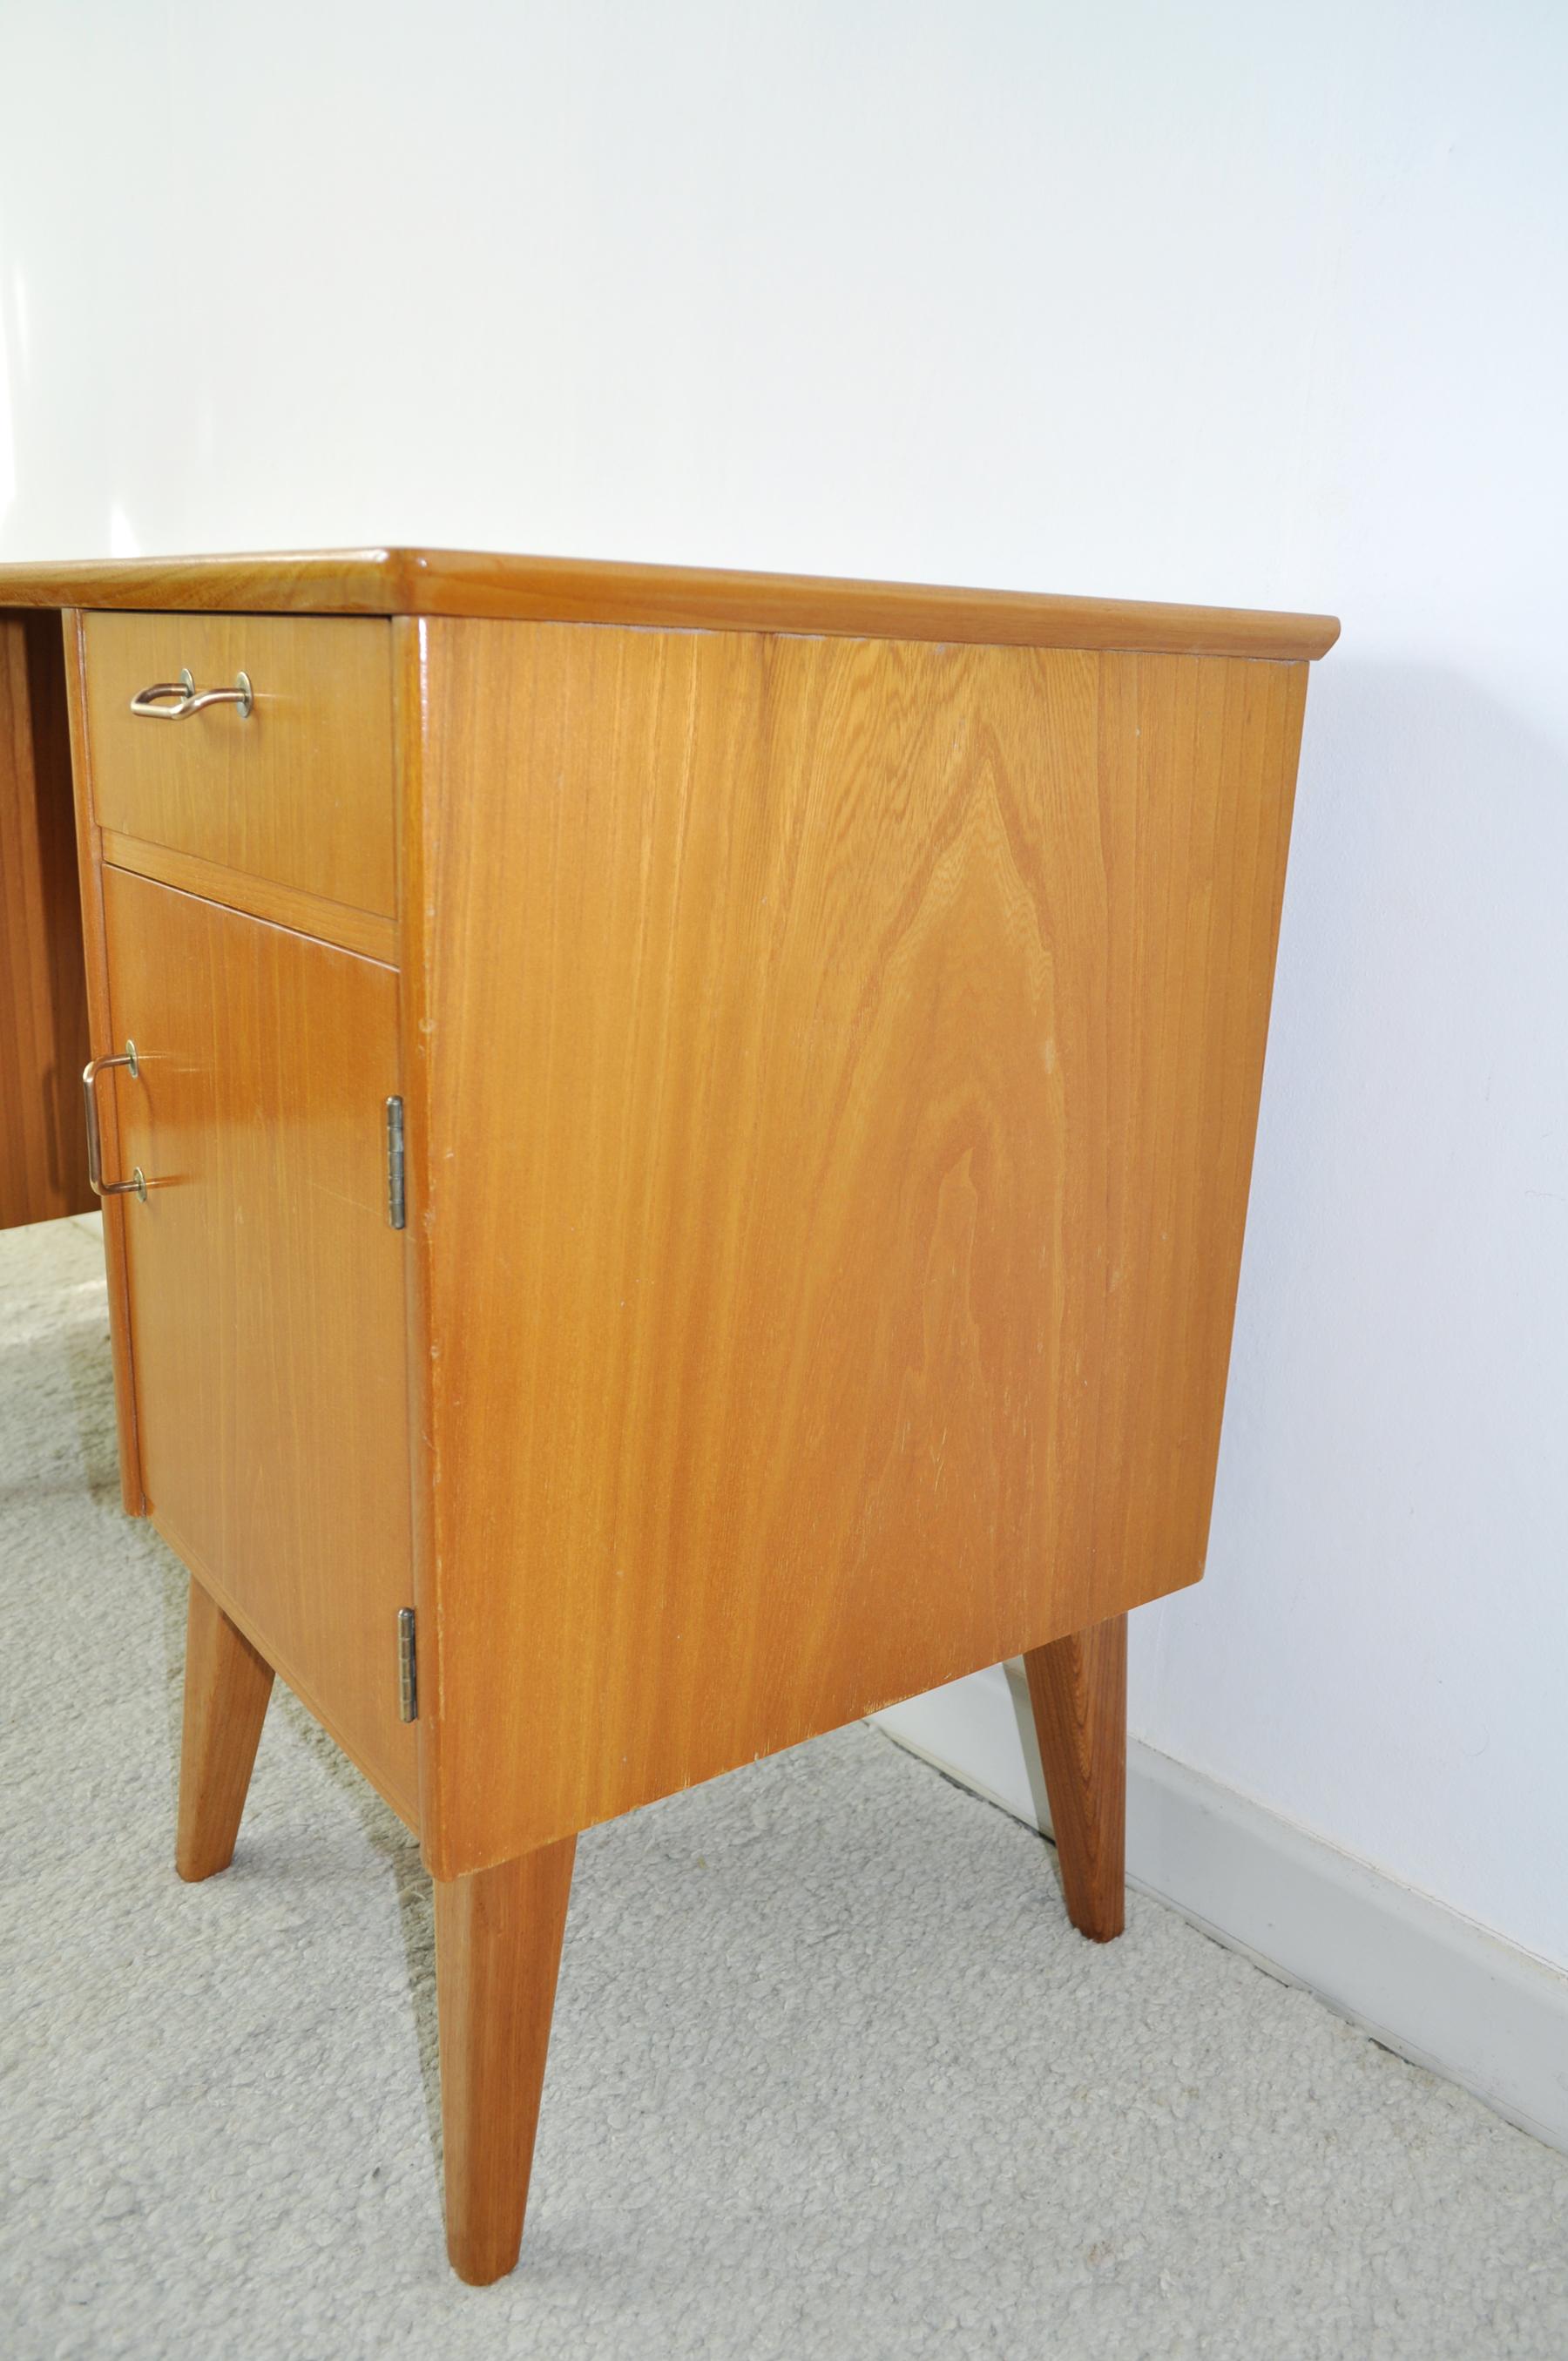 20th Century Childs Executive Desk in Ash with Bowed Top, 1950s